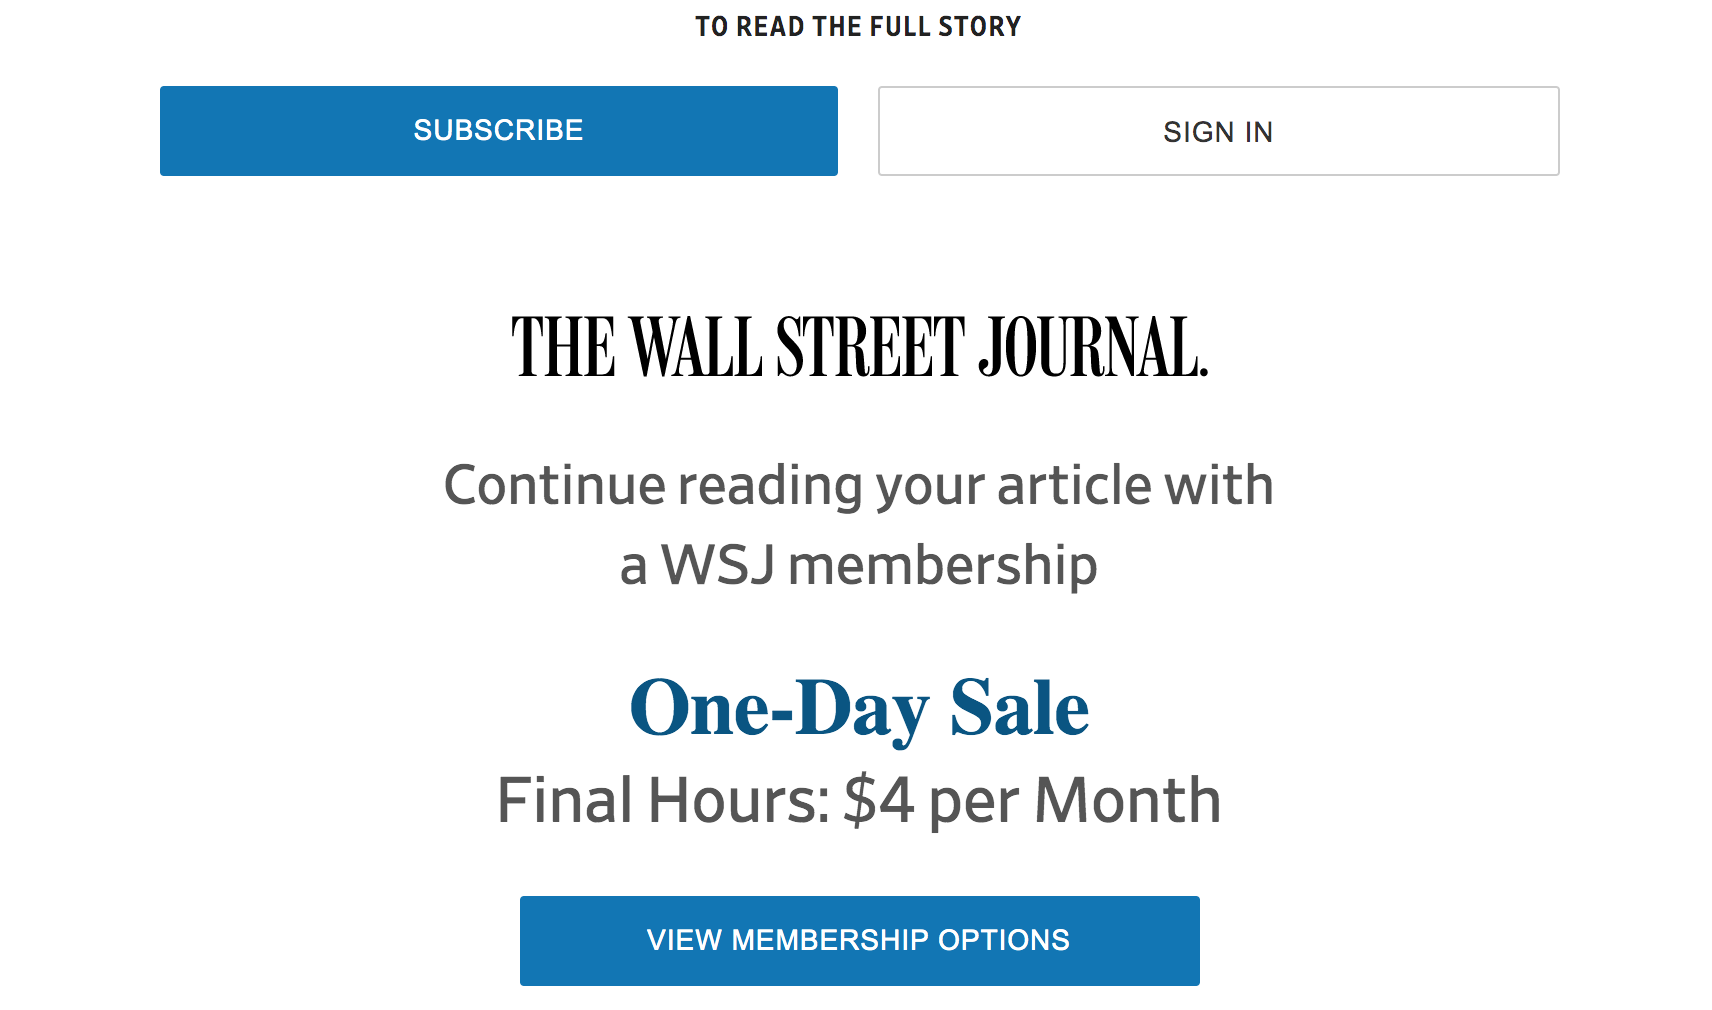 The WSJ is a client of Piano